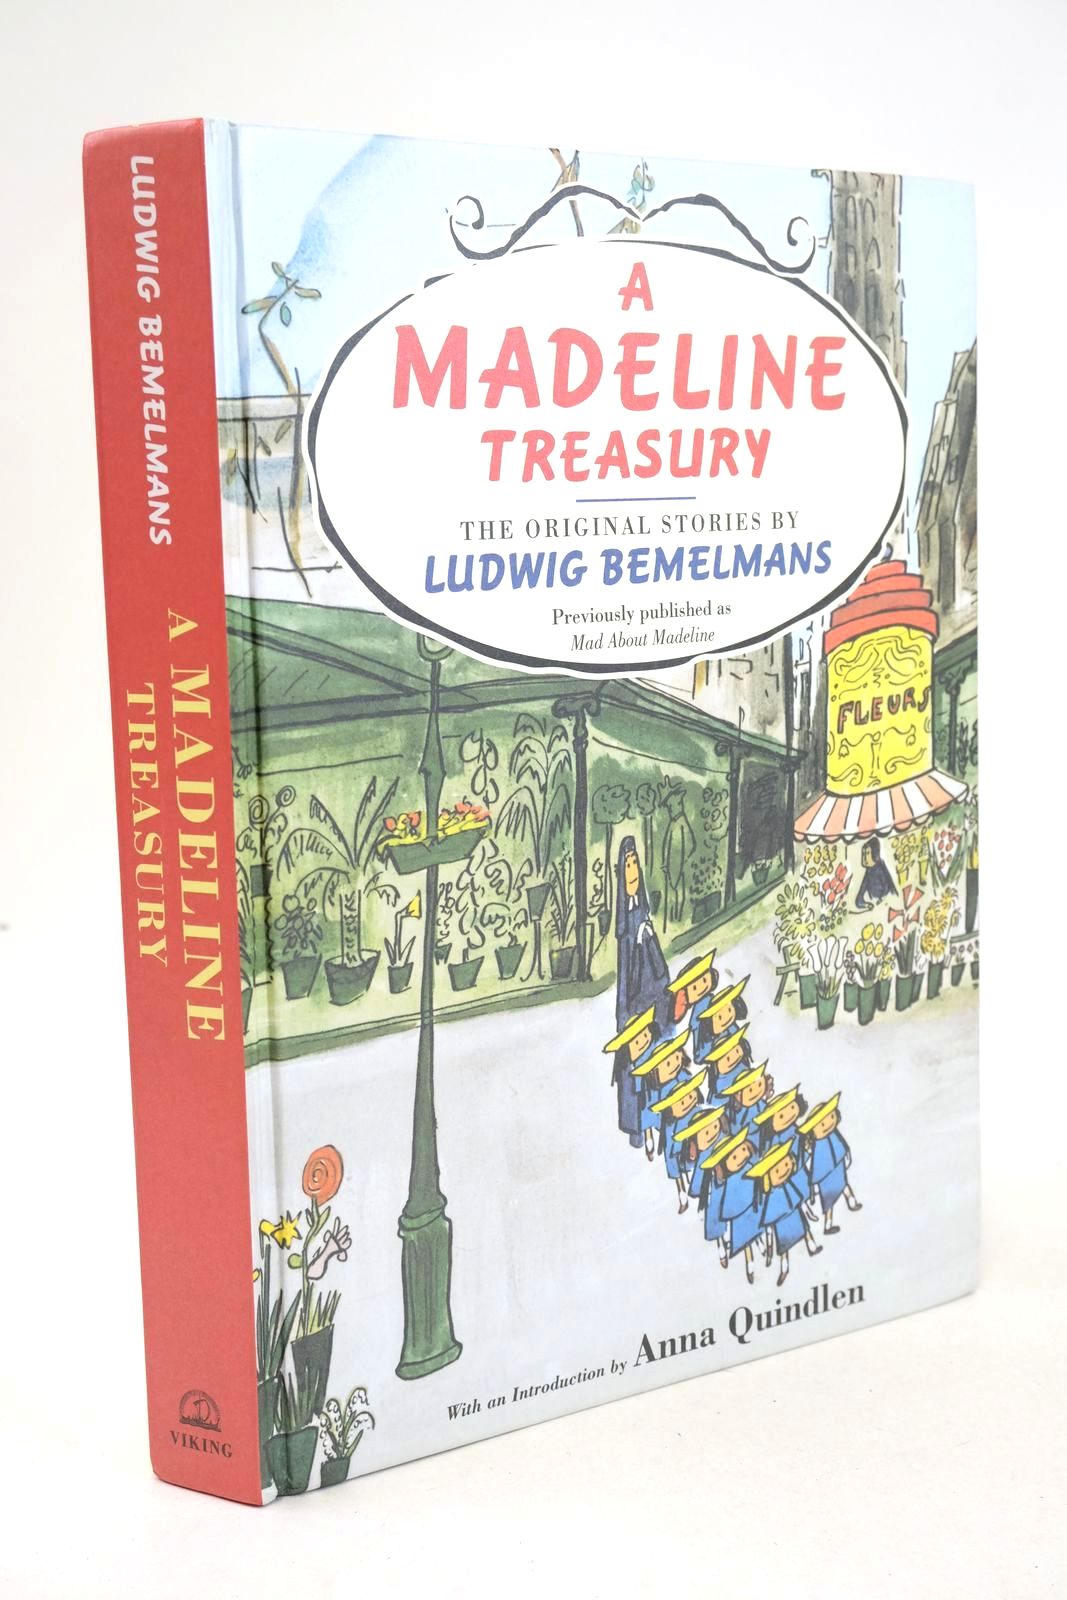 Photo of A MADELINE TREASURY written by Bemelmans, Ludwig
Quindlen, Anna illustrated by Bemelmans, Ludwig published by Viking, The Penguin Group (STOCK CODE: 1326172)  for sale by Stella & Rose's Books